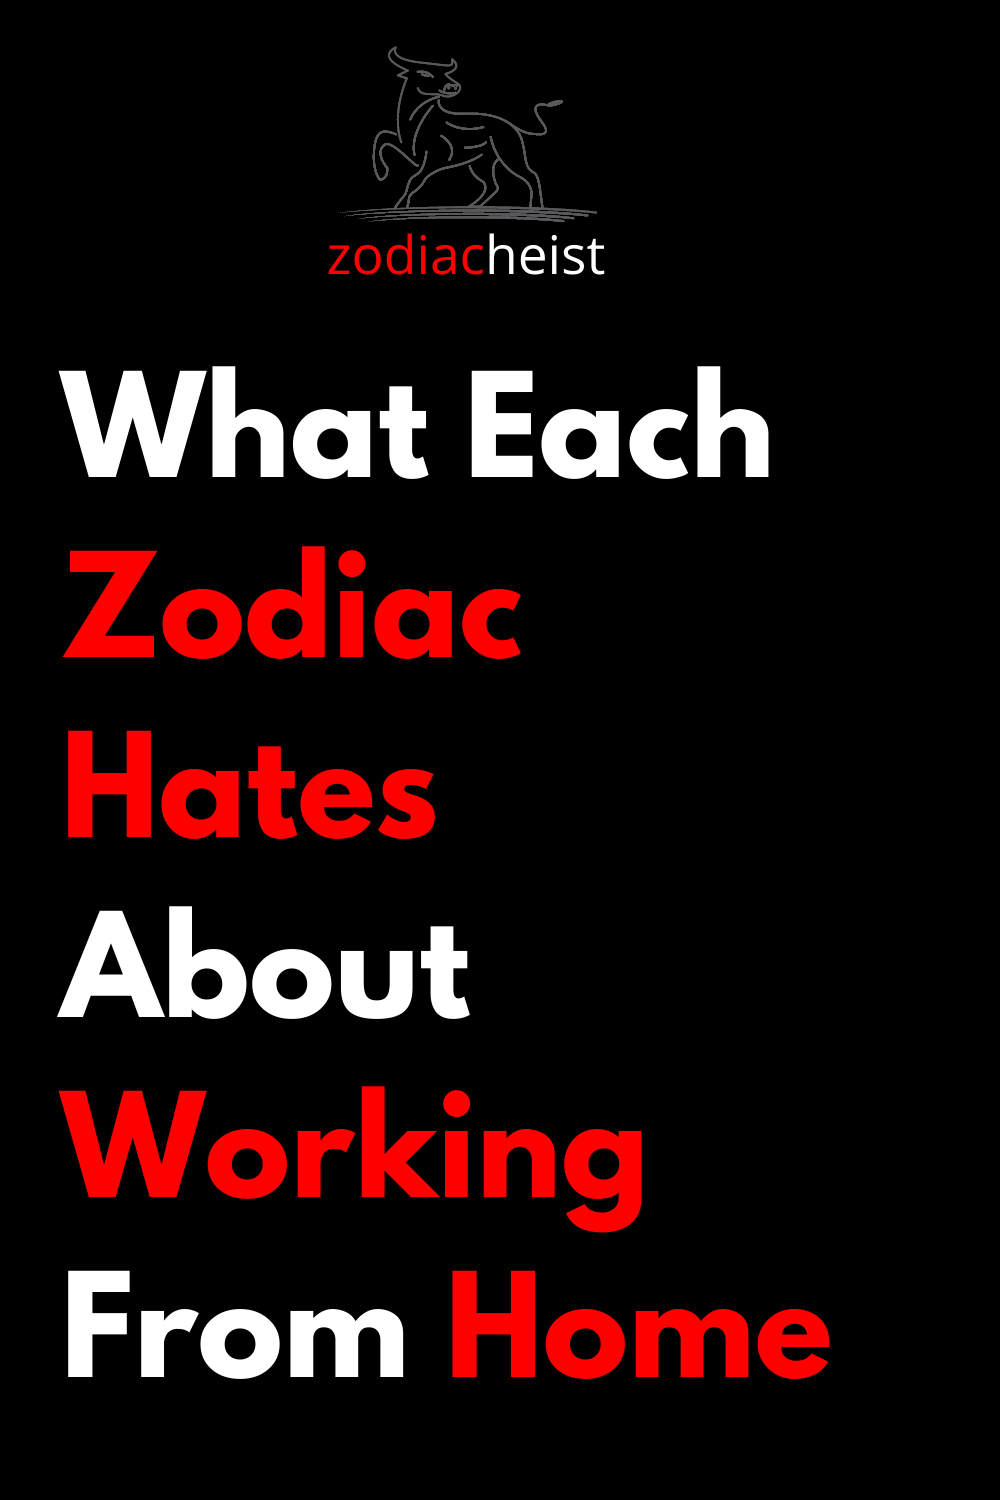 What Each Zodiac Hates About Working From Home